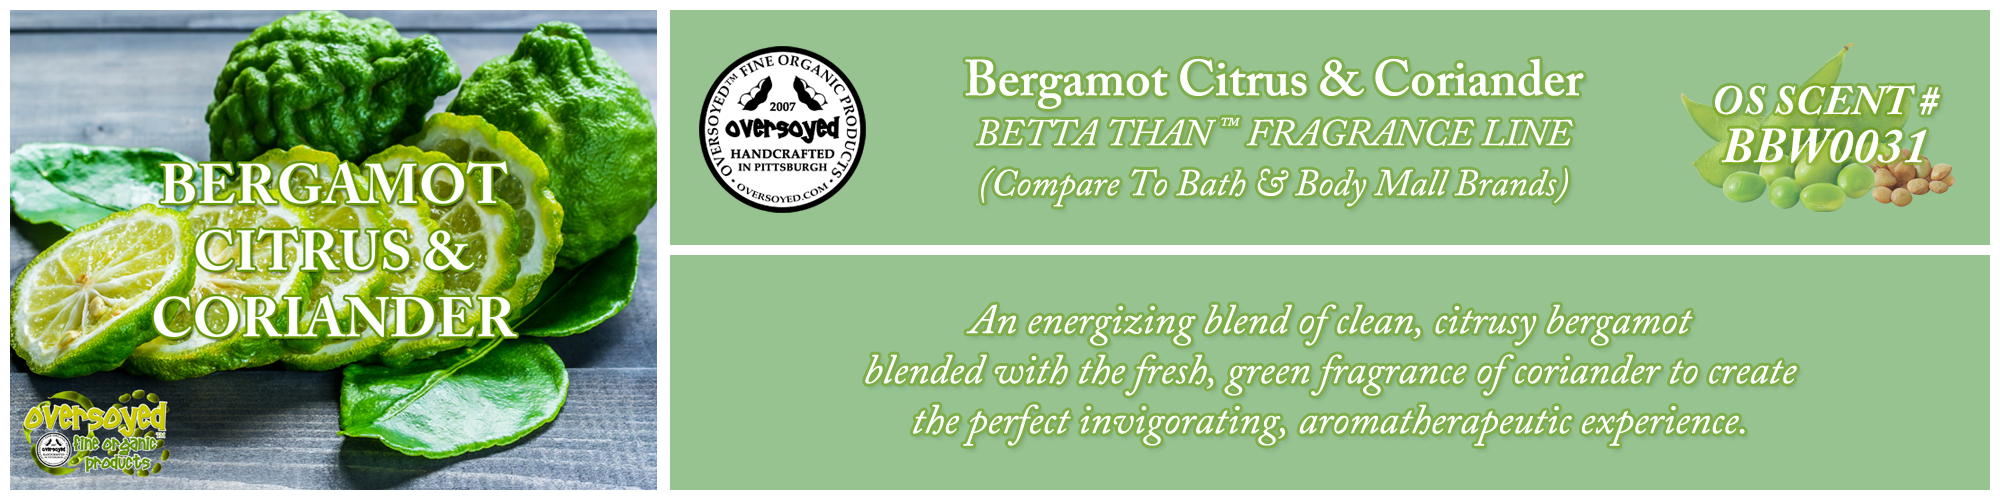 Bergamot Citrus & Coriander Handcrafted Products Collection